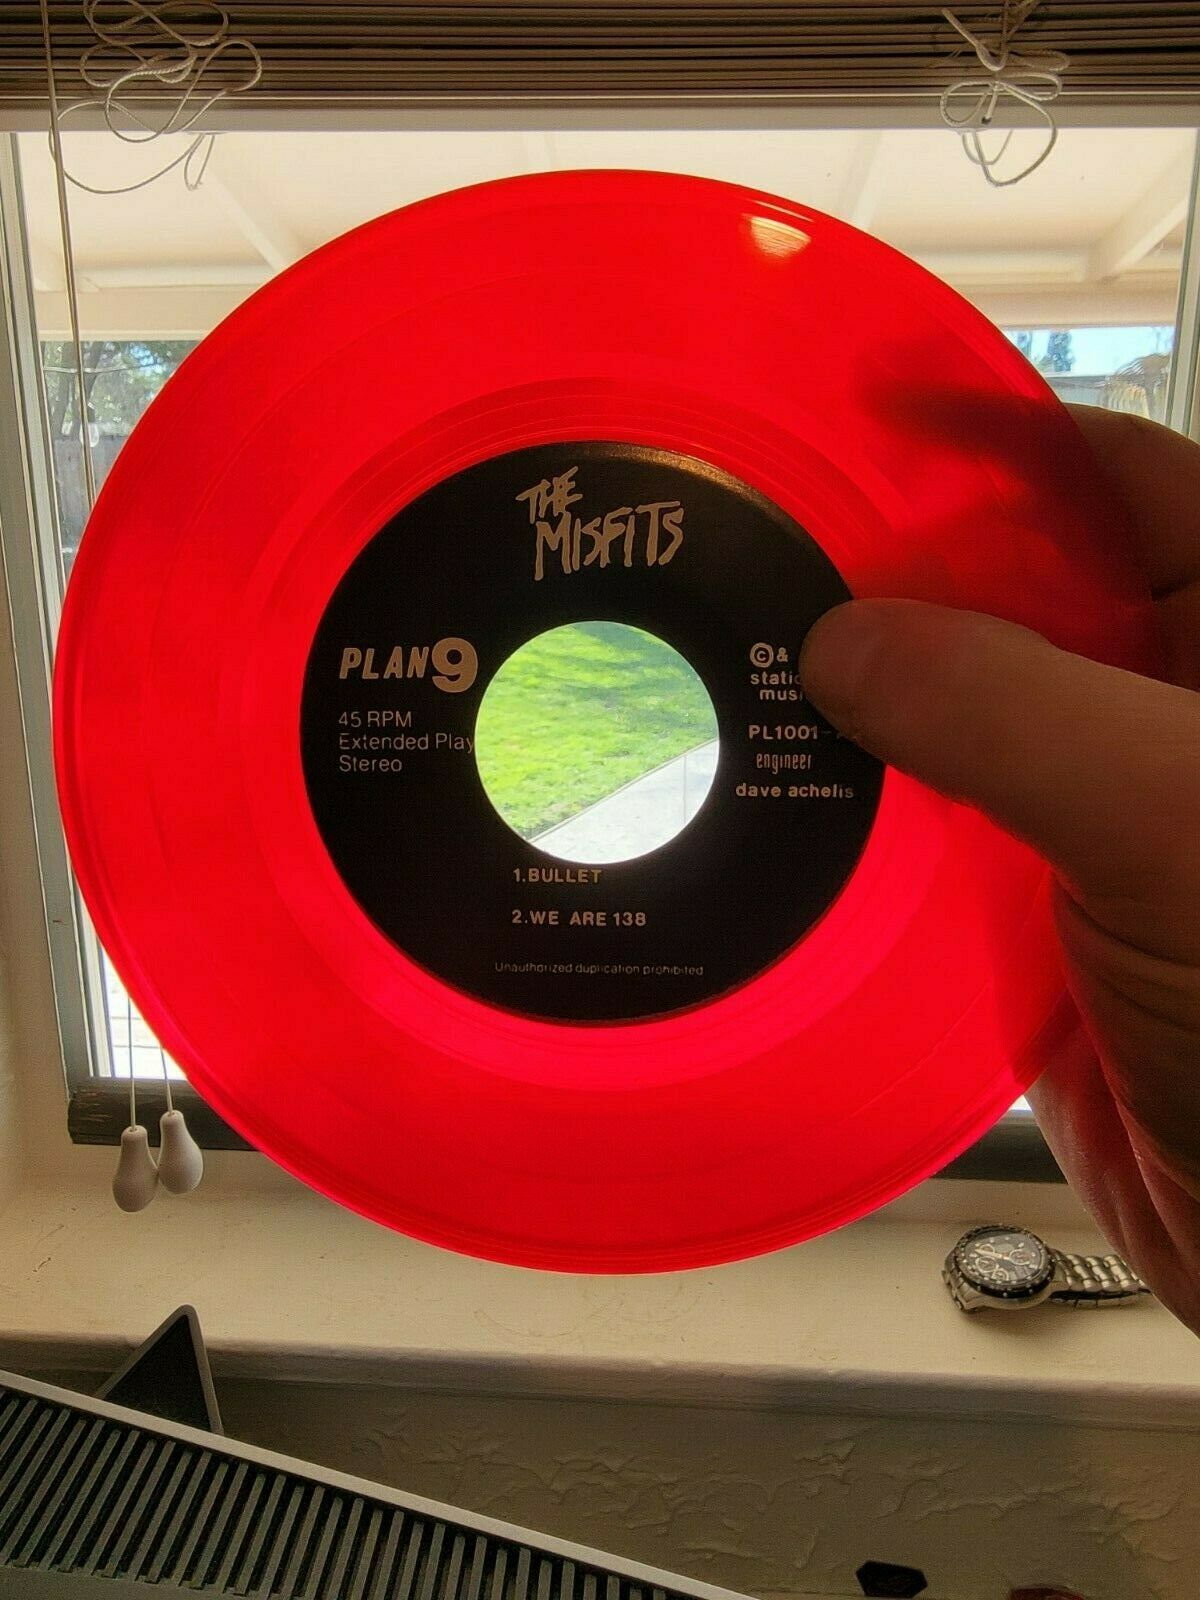 Pic 4 The Misfits - Bullet 7" Vinyl - Better Dead on Red - Press 1000 -Translucent Red